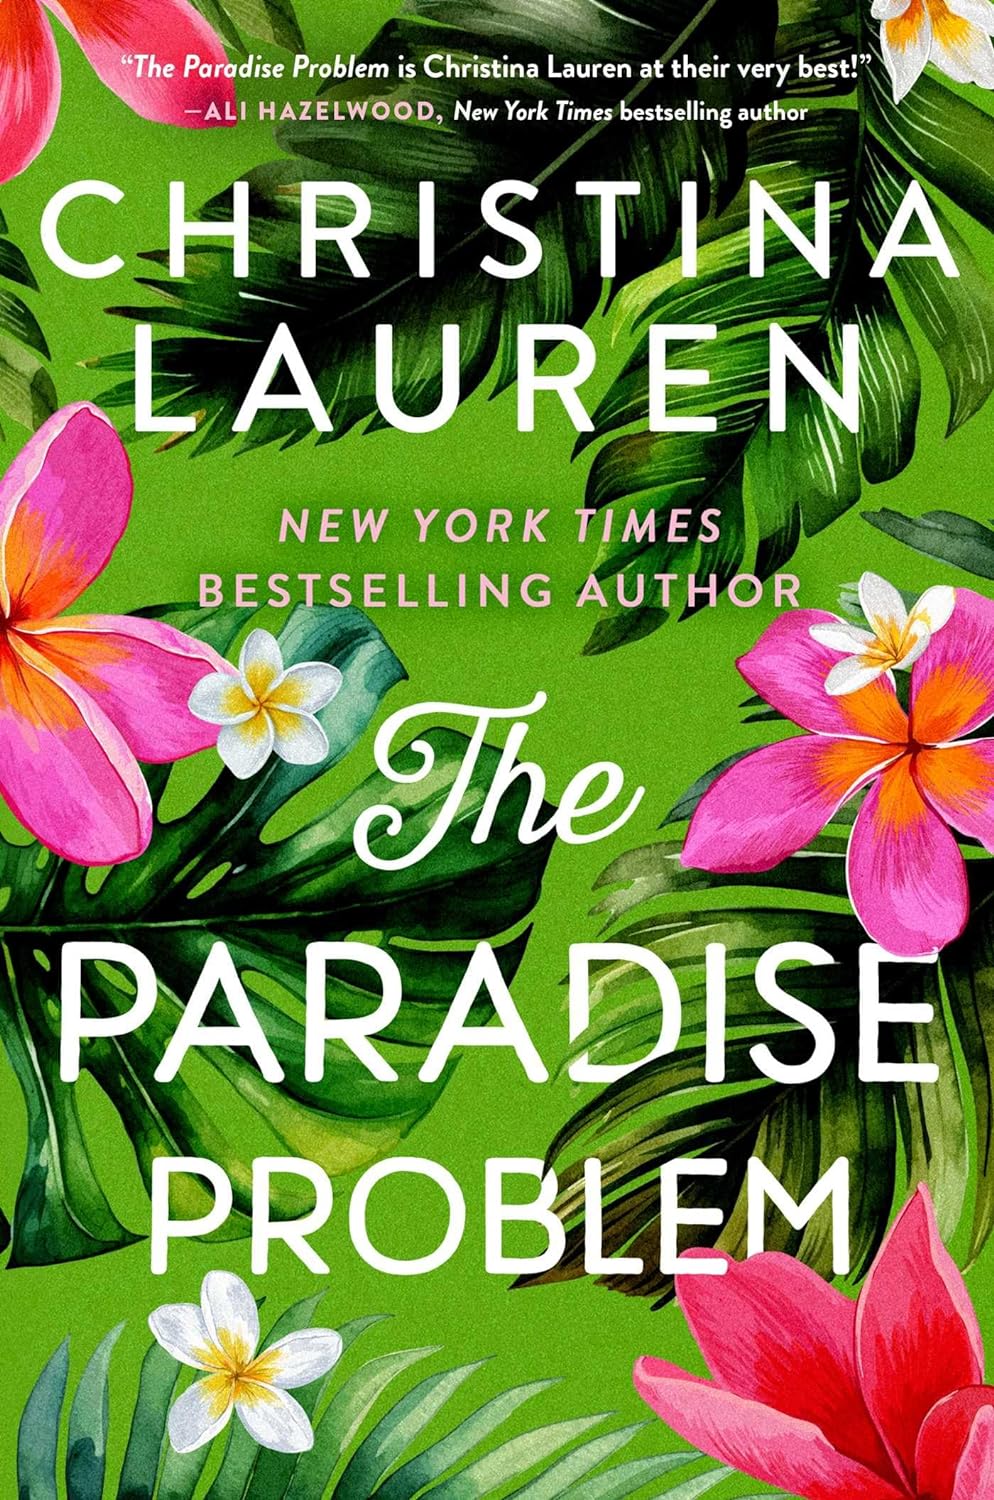 The Paradise Problem book cover